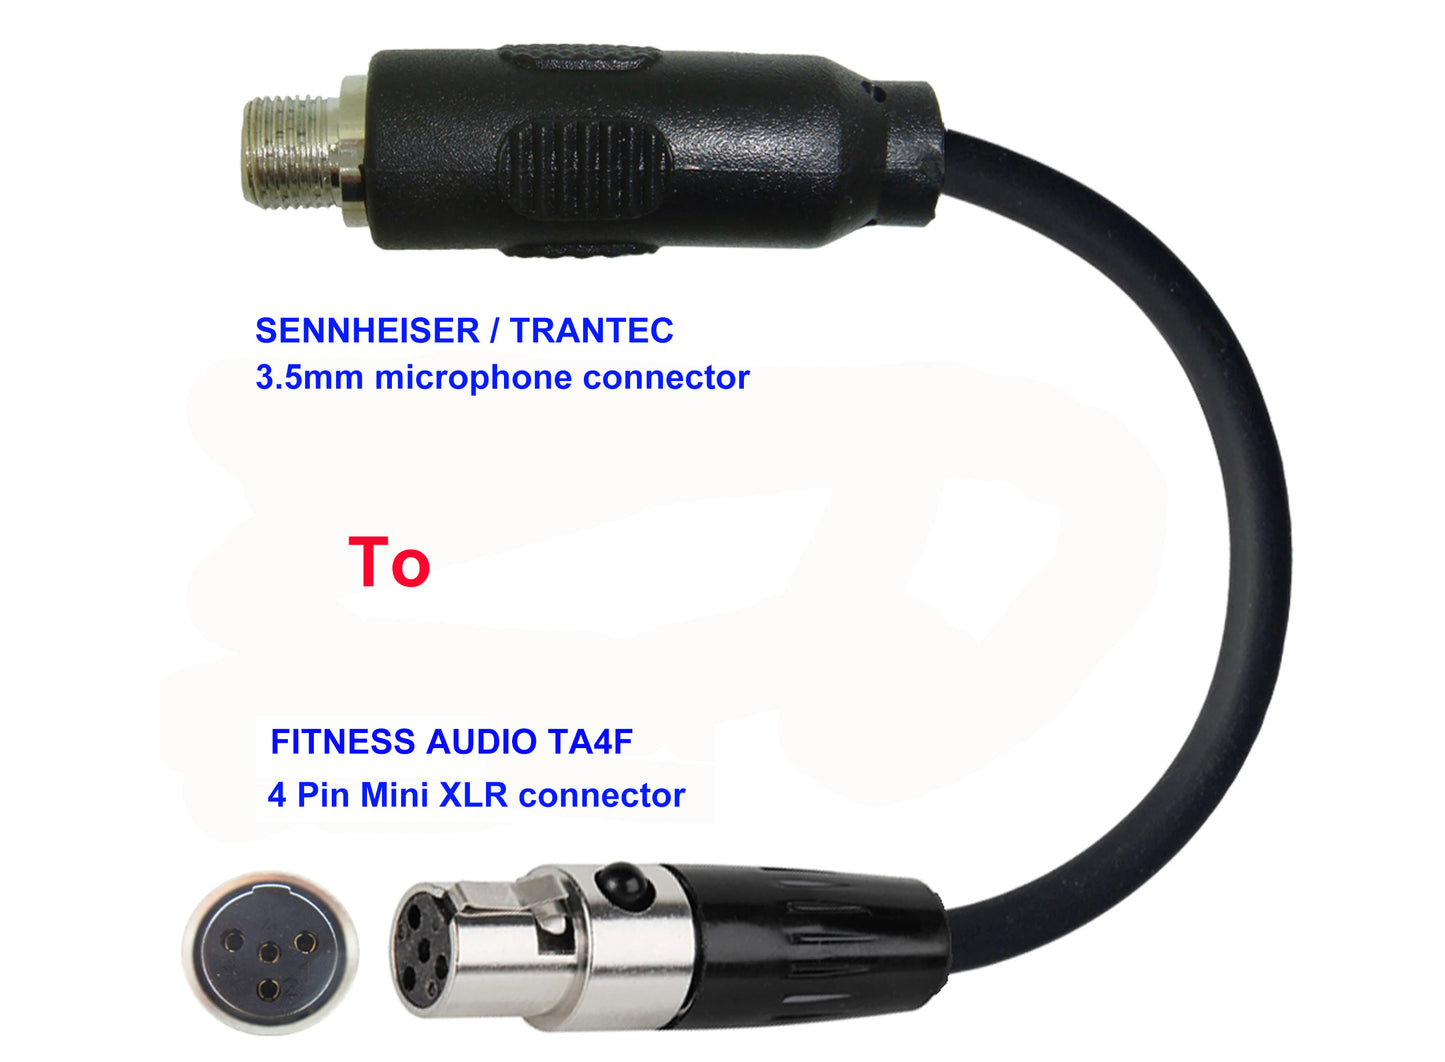 Microphone Adapter - Sennheiser / Trantec Microphones with 3.5mm Locking connector TO Fitness Audio Transmitters with 4 pin TA4M connector